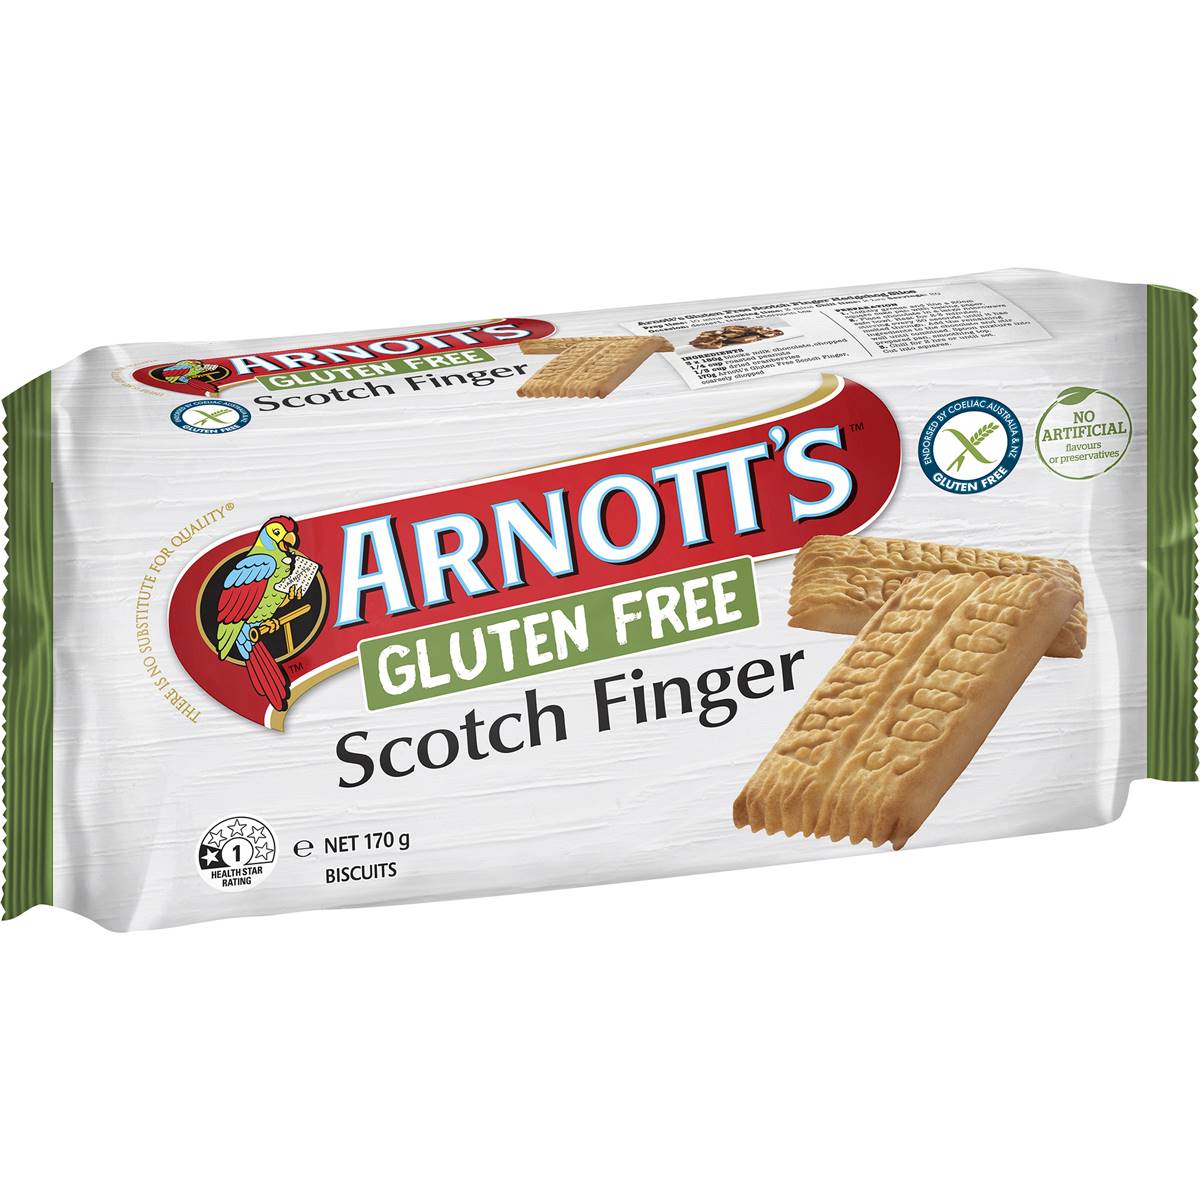 Calories In Arnotts Gluten Free Scotch Finger Biscuits Calcount 5891